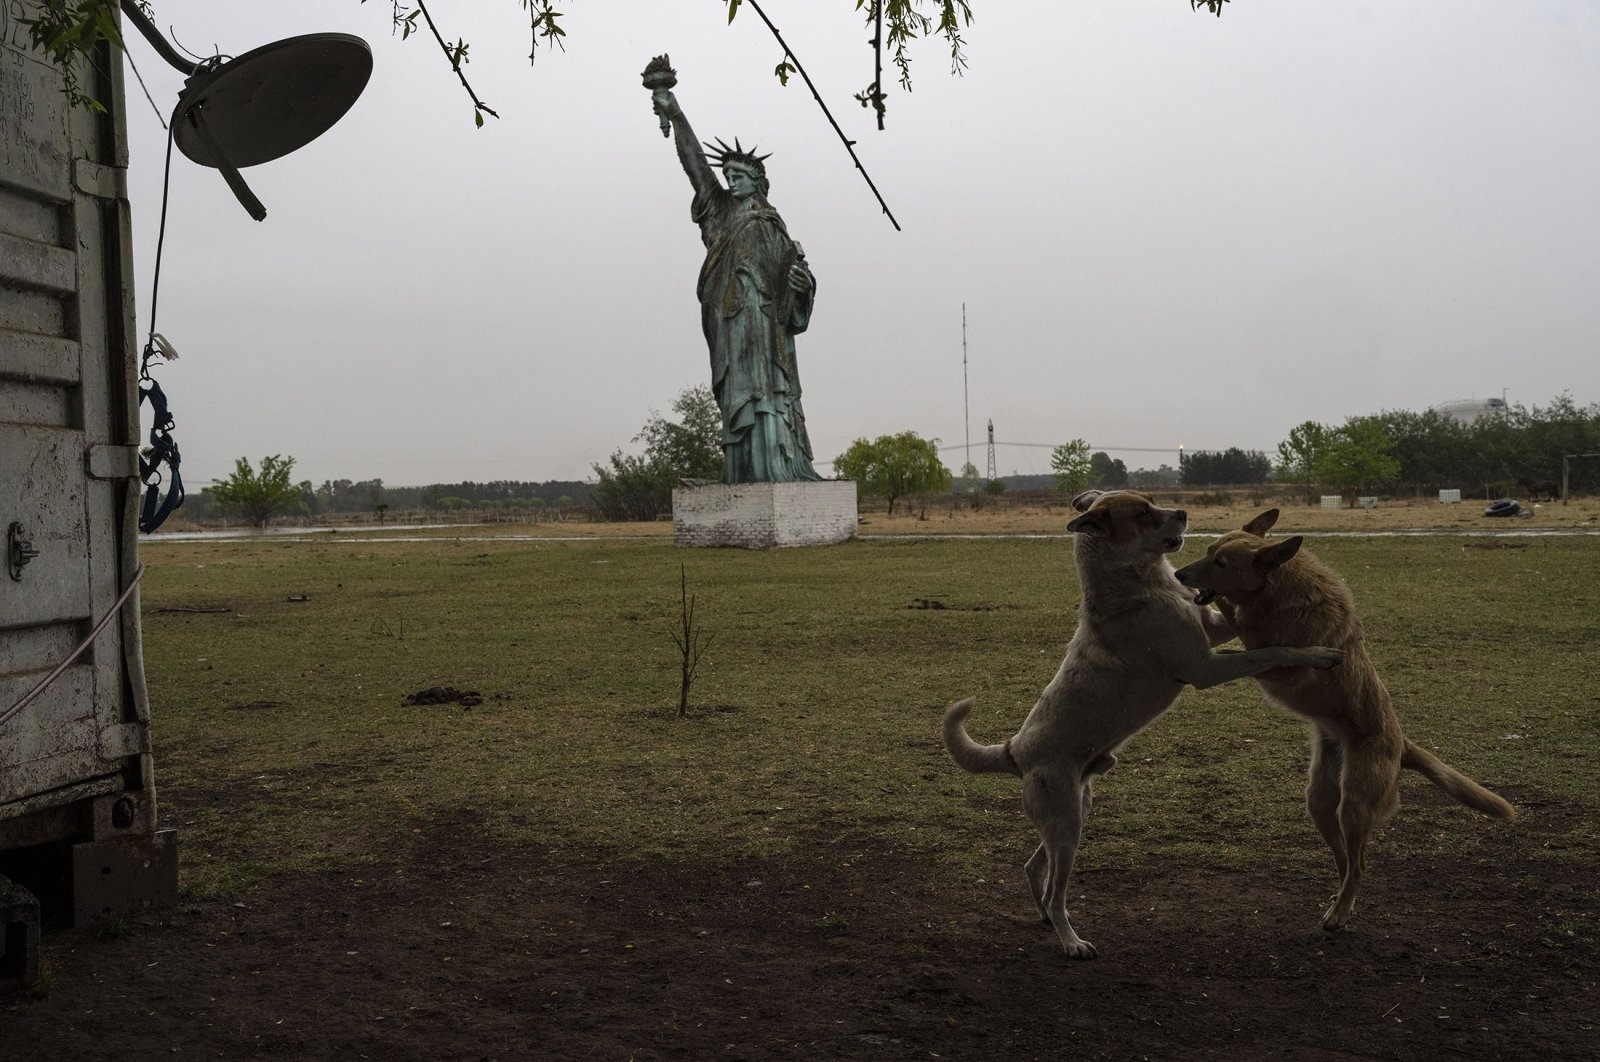 Dogs frolic near a 49-foot replica of a Statue of Liberty, in General Rodriguez, Argentina, Oct. 15, 2022. (AP Photo)